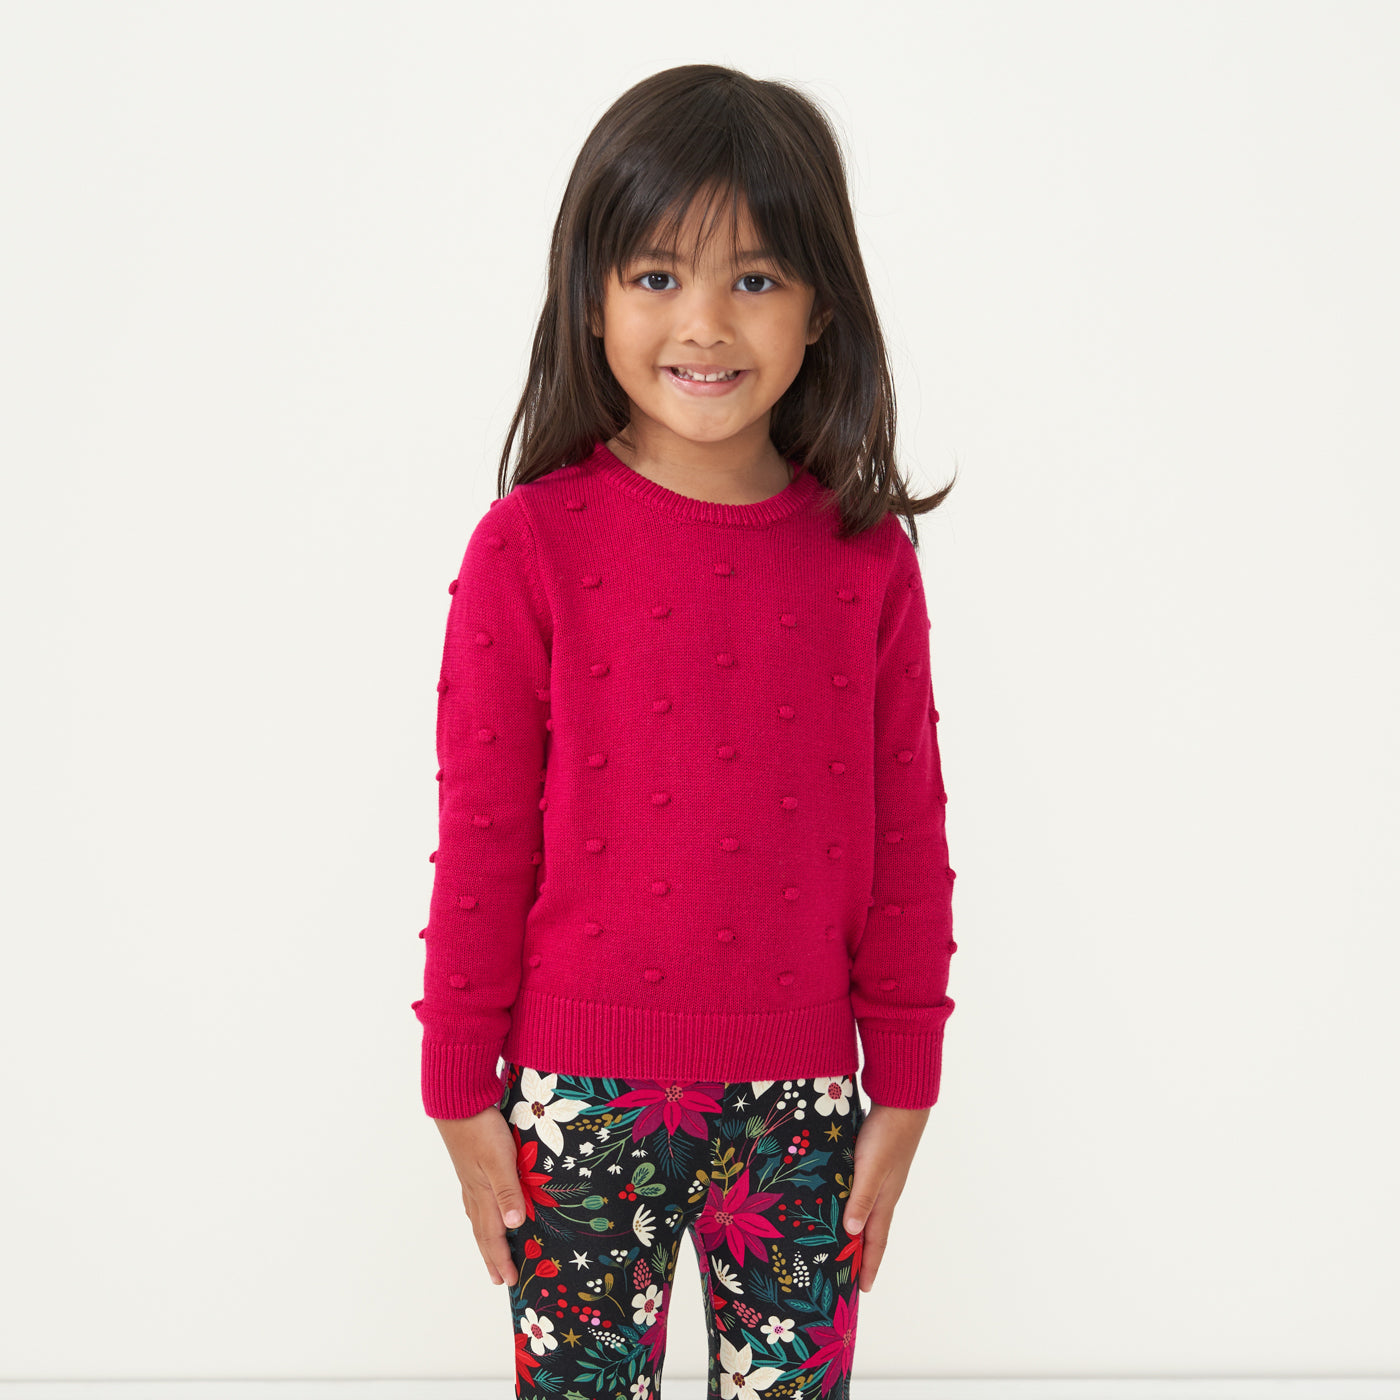 Alternate image of a child wearing Mixed Berry Pom Pom sweater paired with Merry Berry leggings